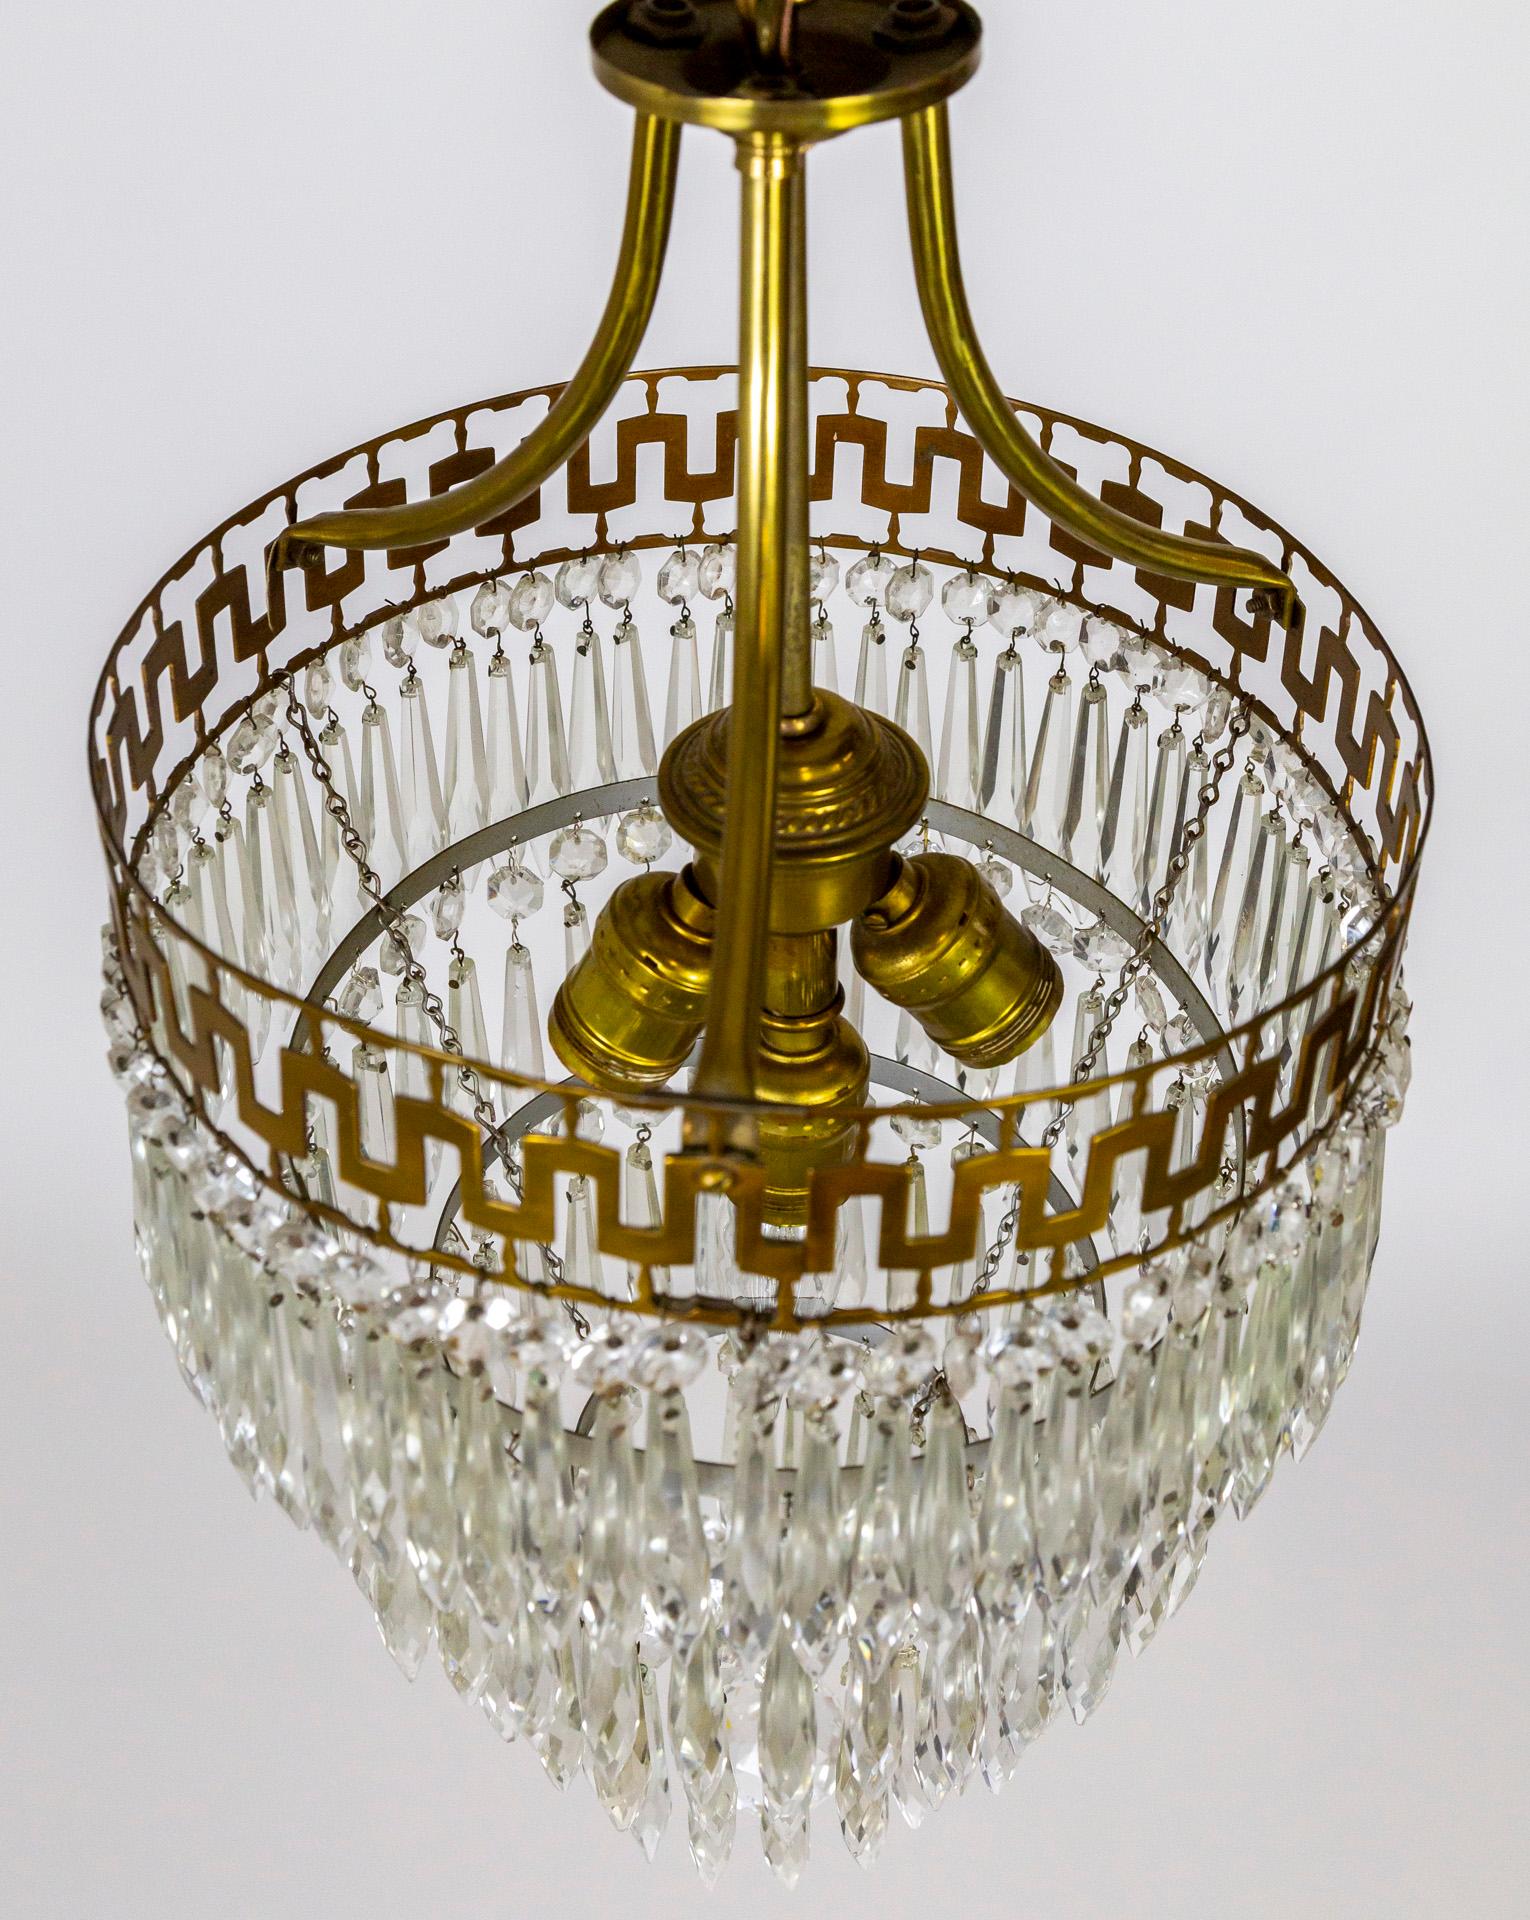 Mid-20th Cent. Neoclassical Cut Brass & Crystal Wedding Cake Pendant Light For Sale 4